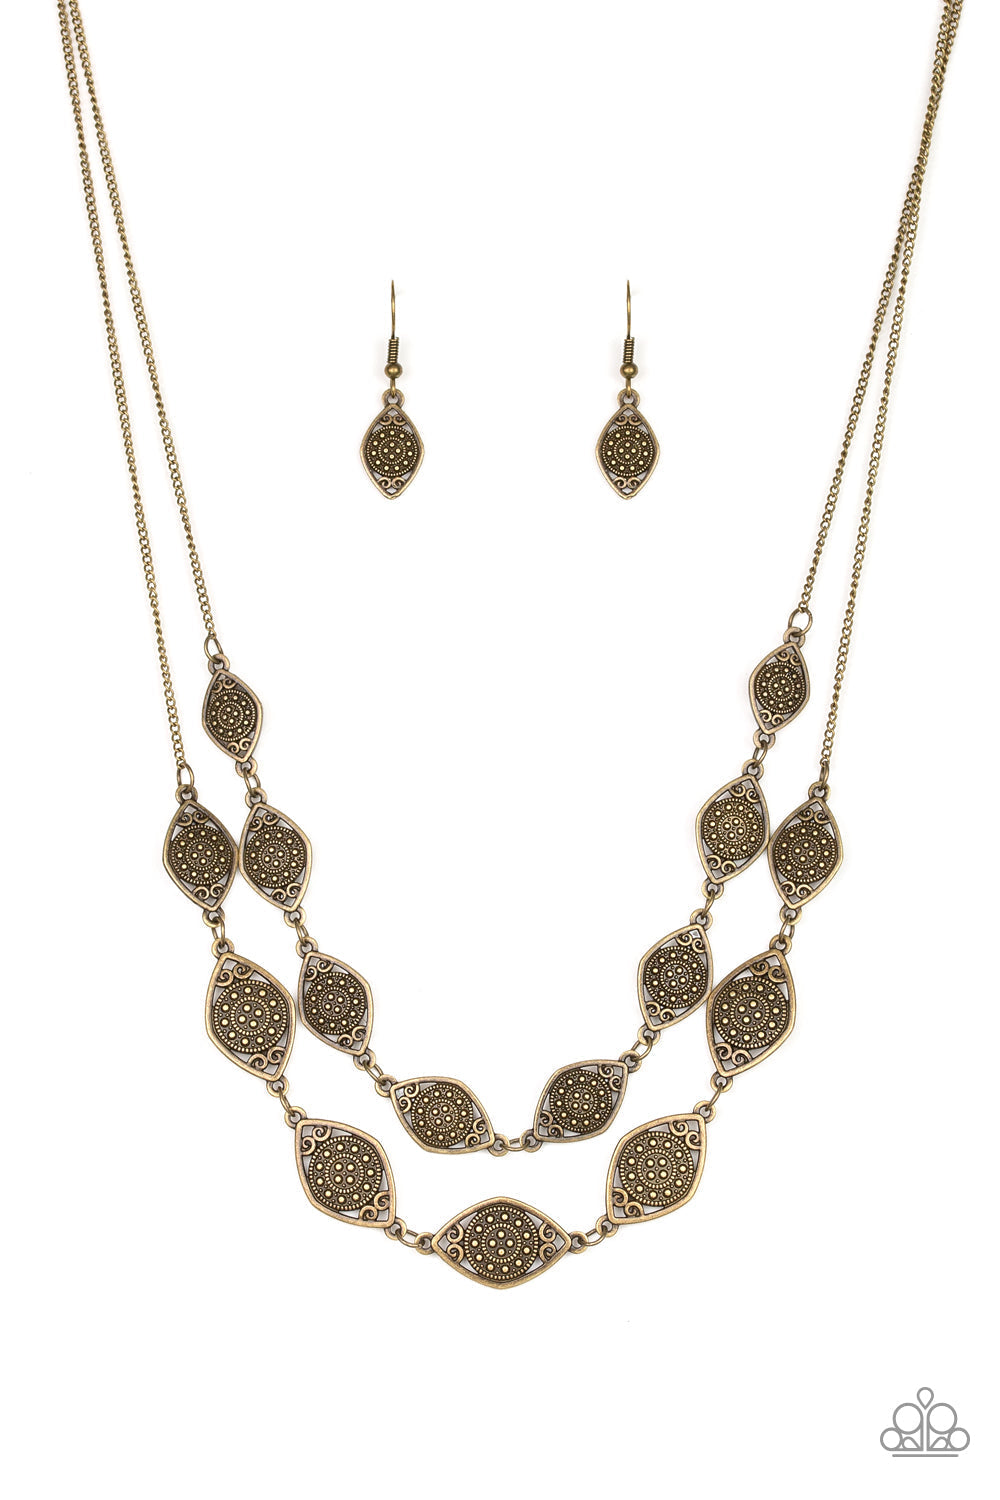 Make Yourself At HOMESTEAD - Brass Chain Fashion Necklace - Paparazzi Accessories -Featuring ornate brass centers, marquise shaped frames link into two rows below the collar for a rustic look. Features an adjustable clasp closure. Sold as one individual fashion necklace. 